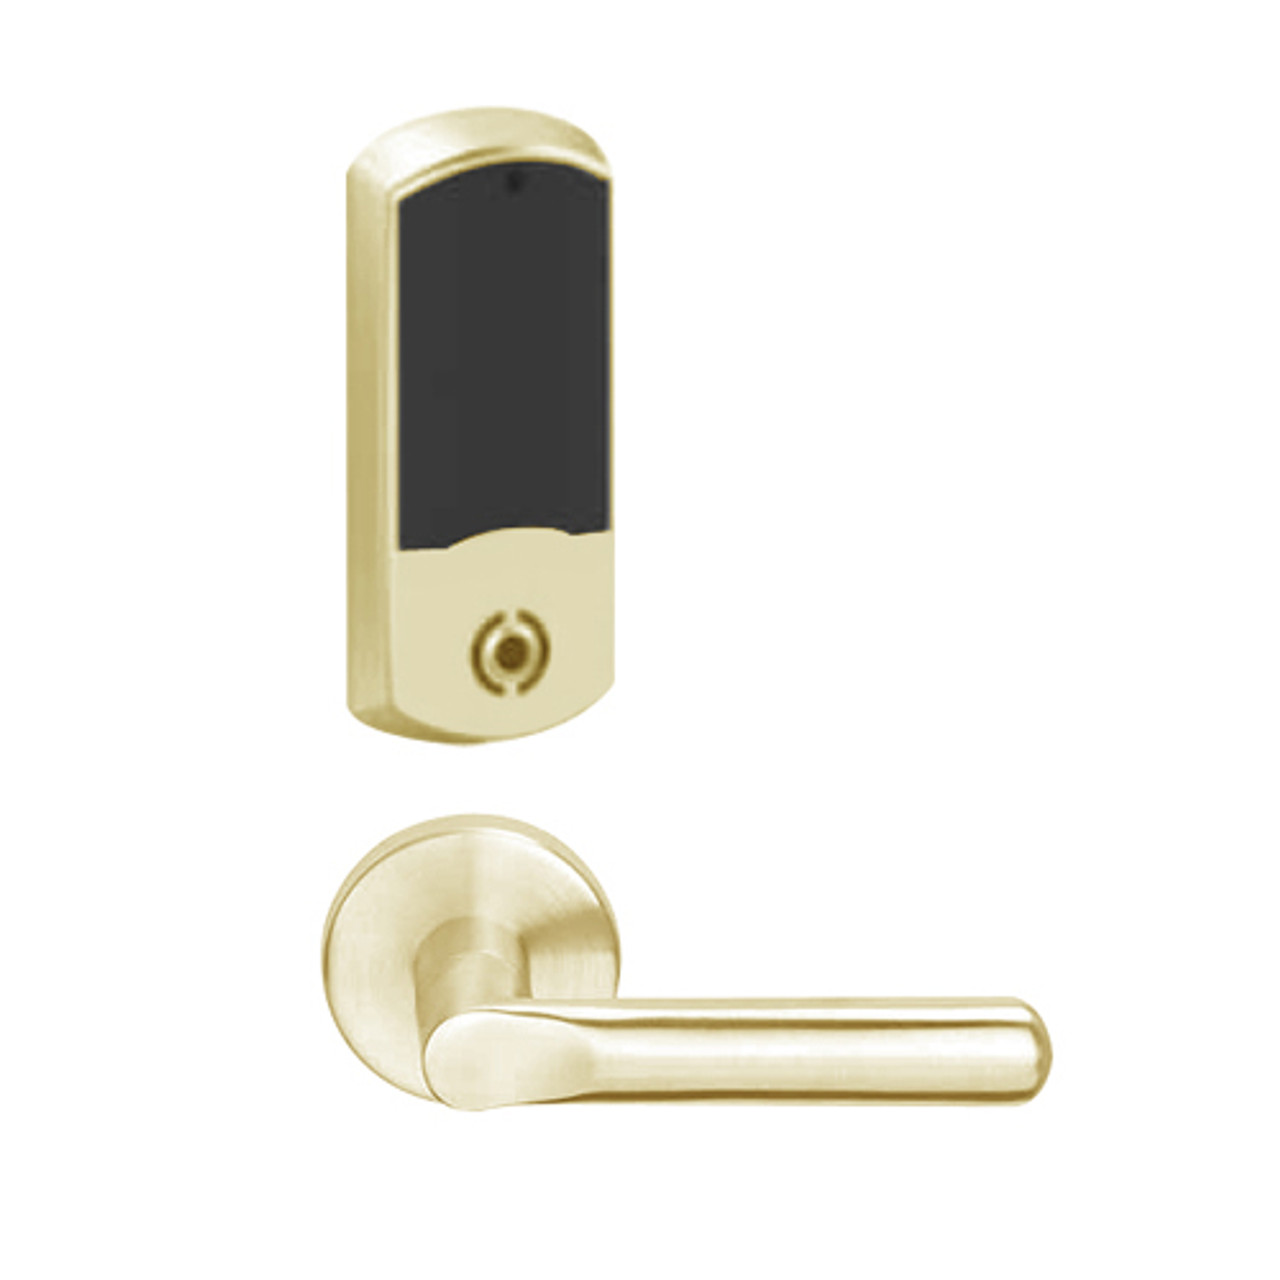 LEMS-GRW-L-18-606-00B Schlage Less Cylinder Storeroom Wireless Greenwich Mortise Lock with LED Indicator and 18 Lever in Satin Brass